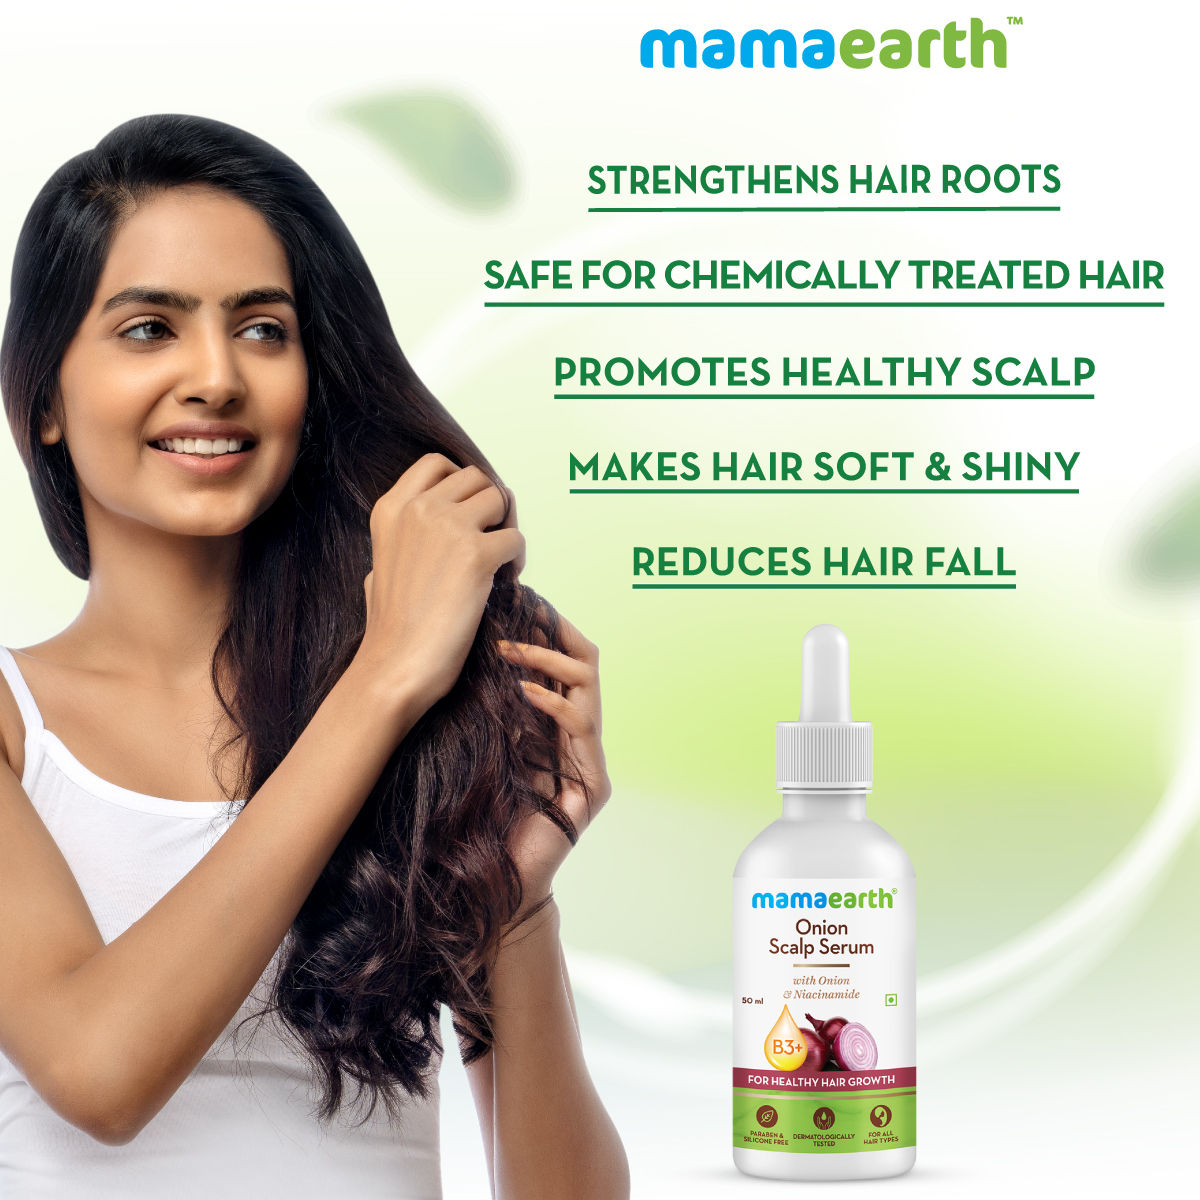 Mamaearth Onion Hair Serum Review After Use Live Demo How to Use   Benefits  YouTube